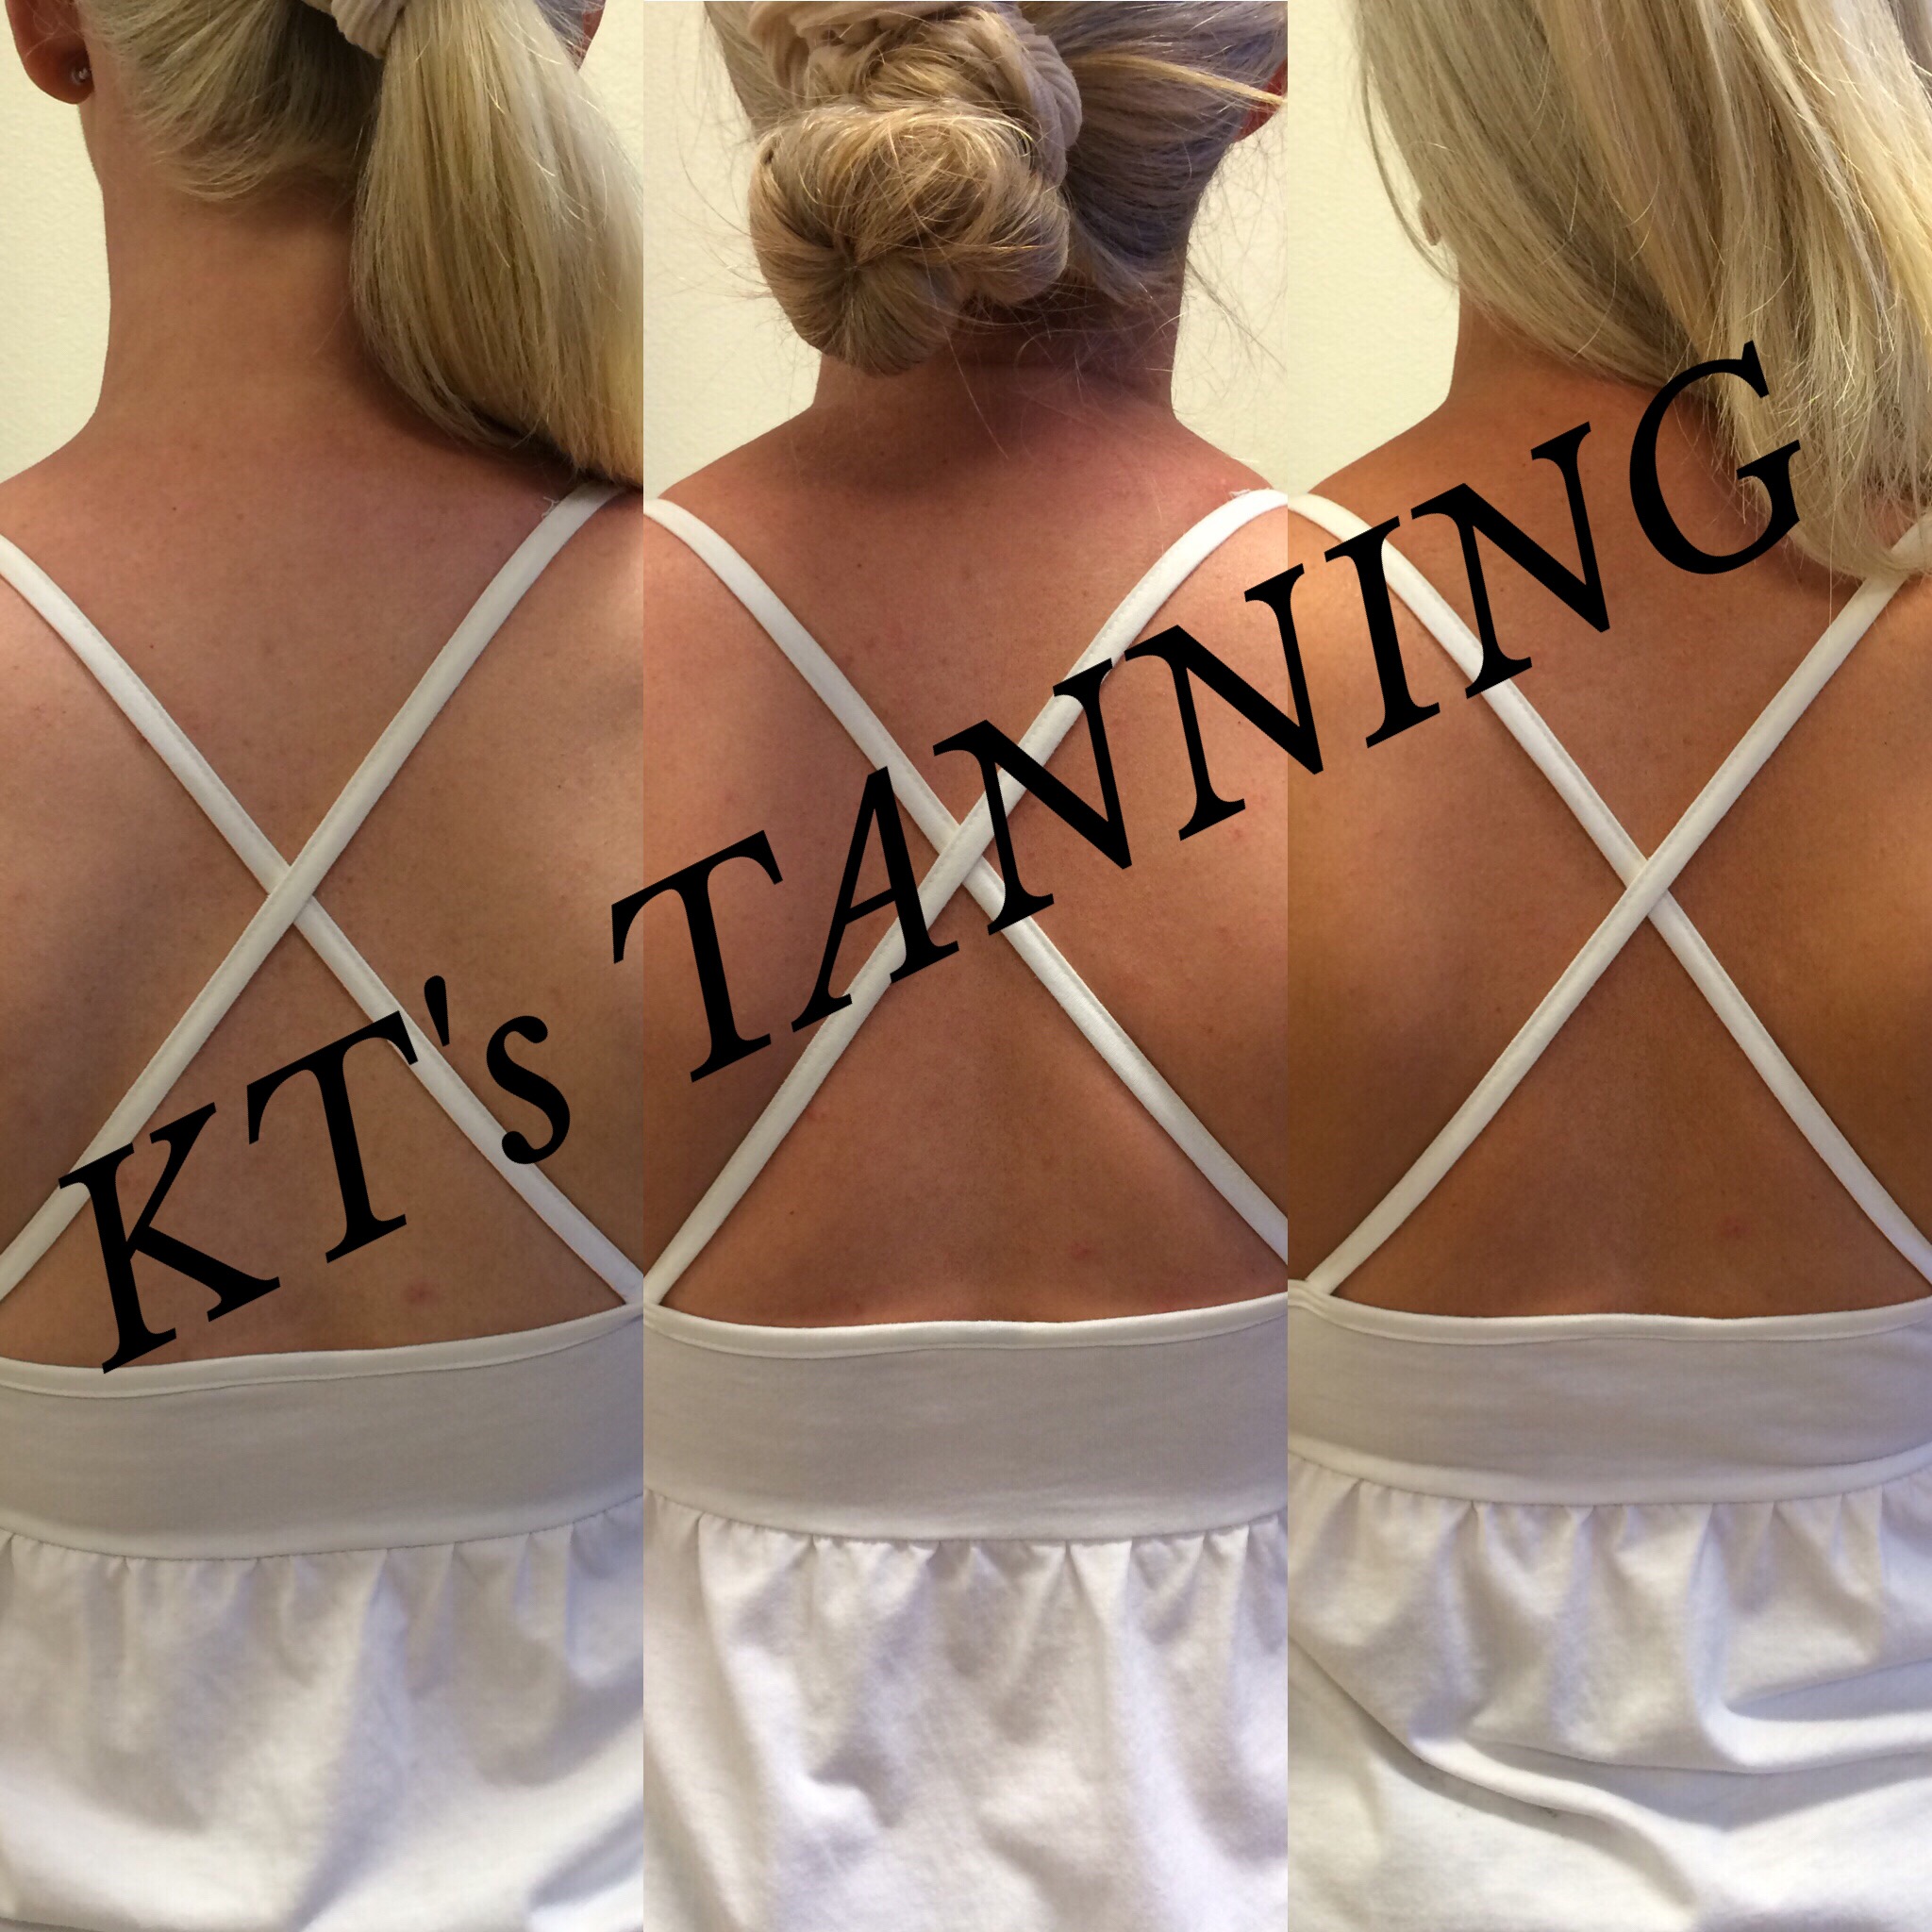 30 Minute How long after spray tan can you workout for Push Pull Legs